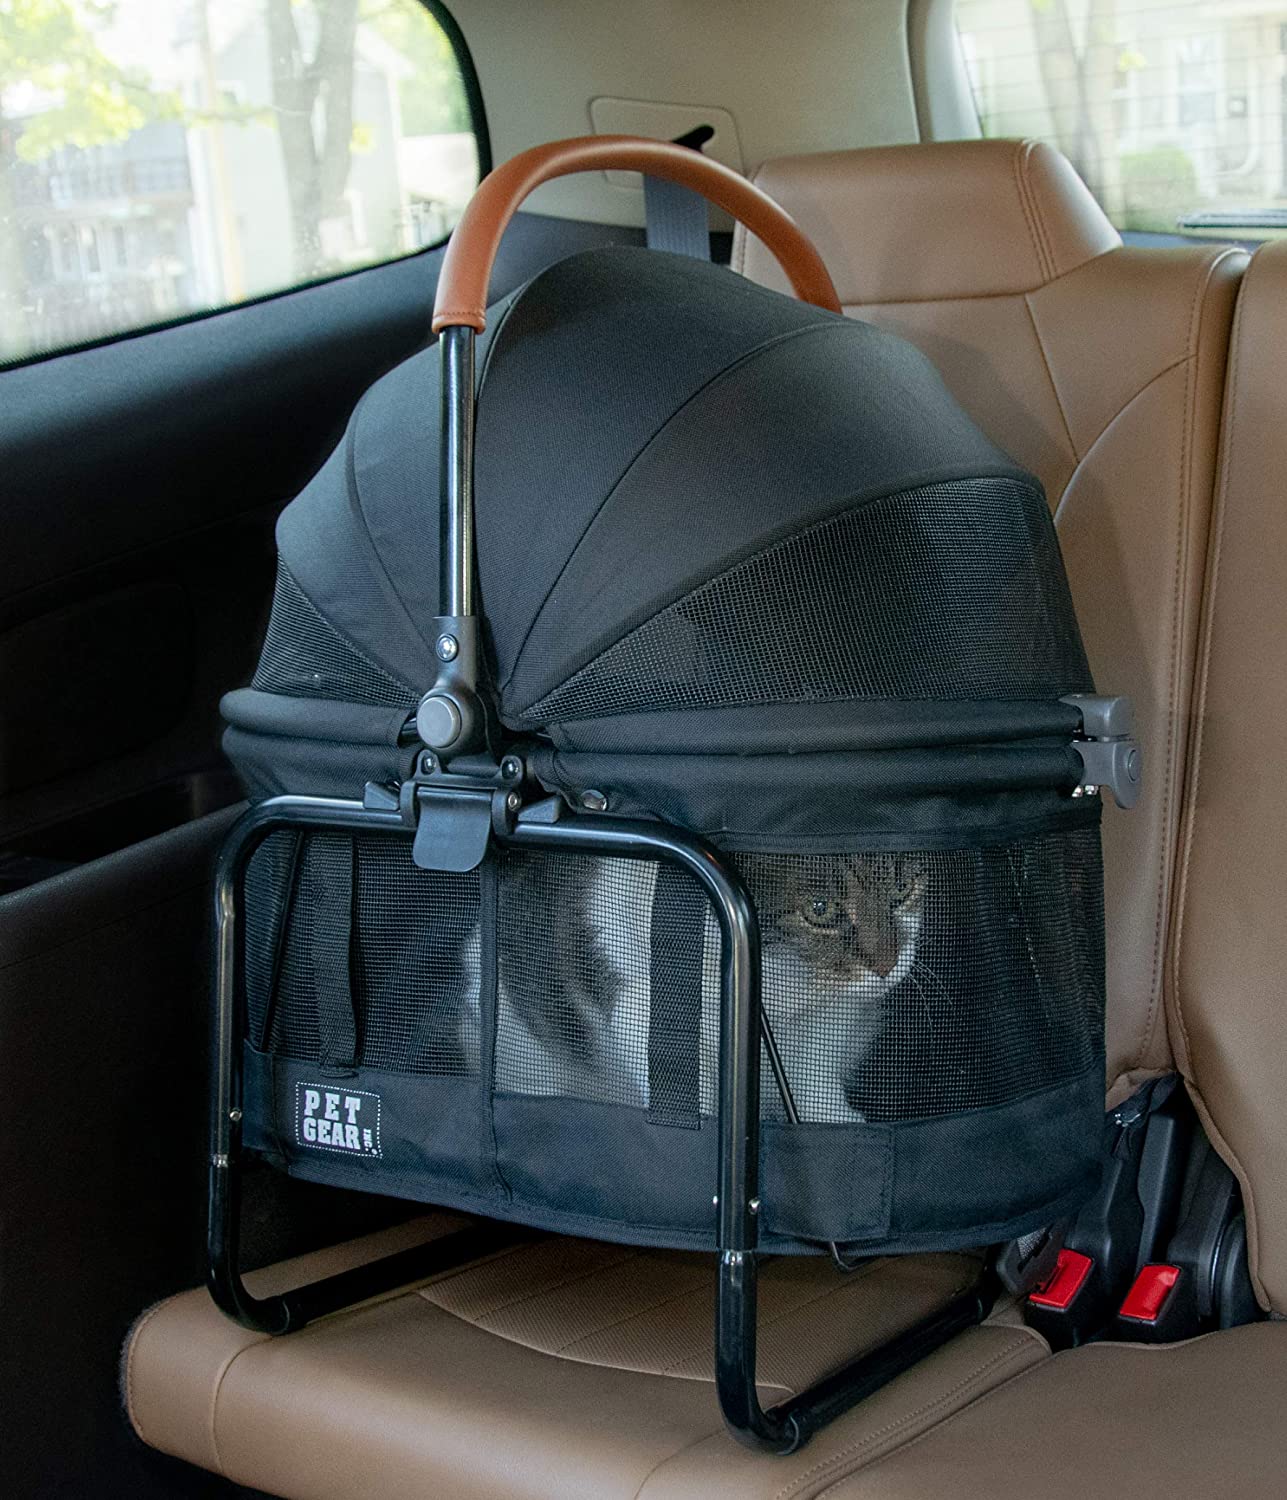 cat carrier booster seat in metal frame on car seat